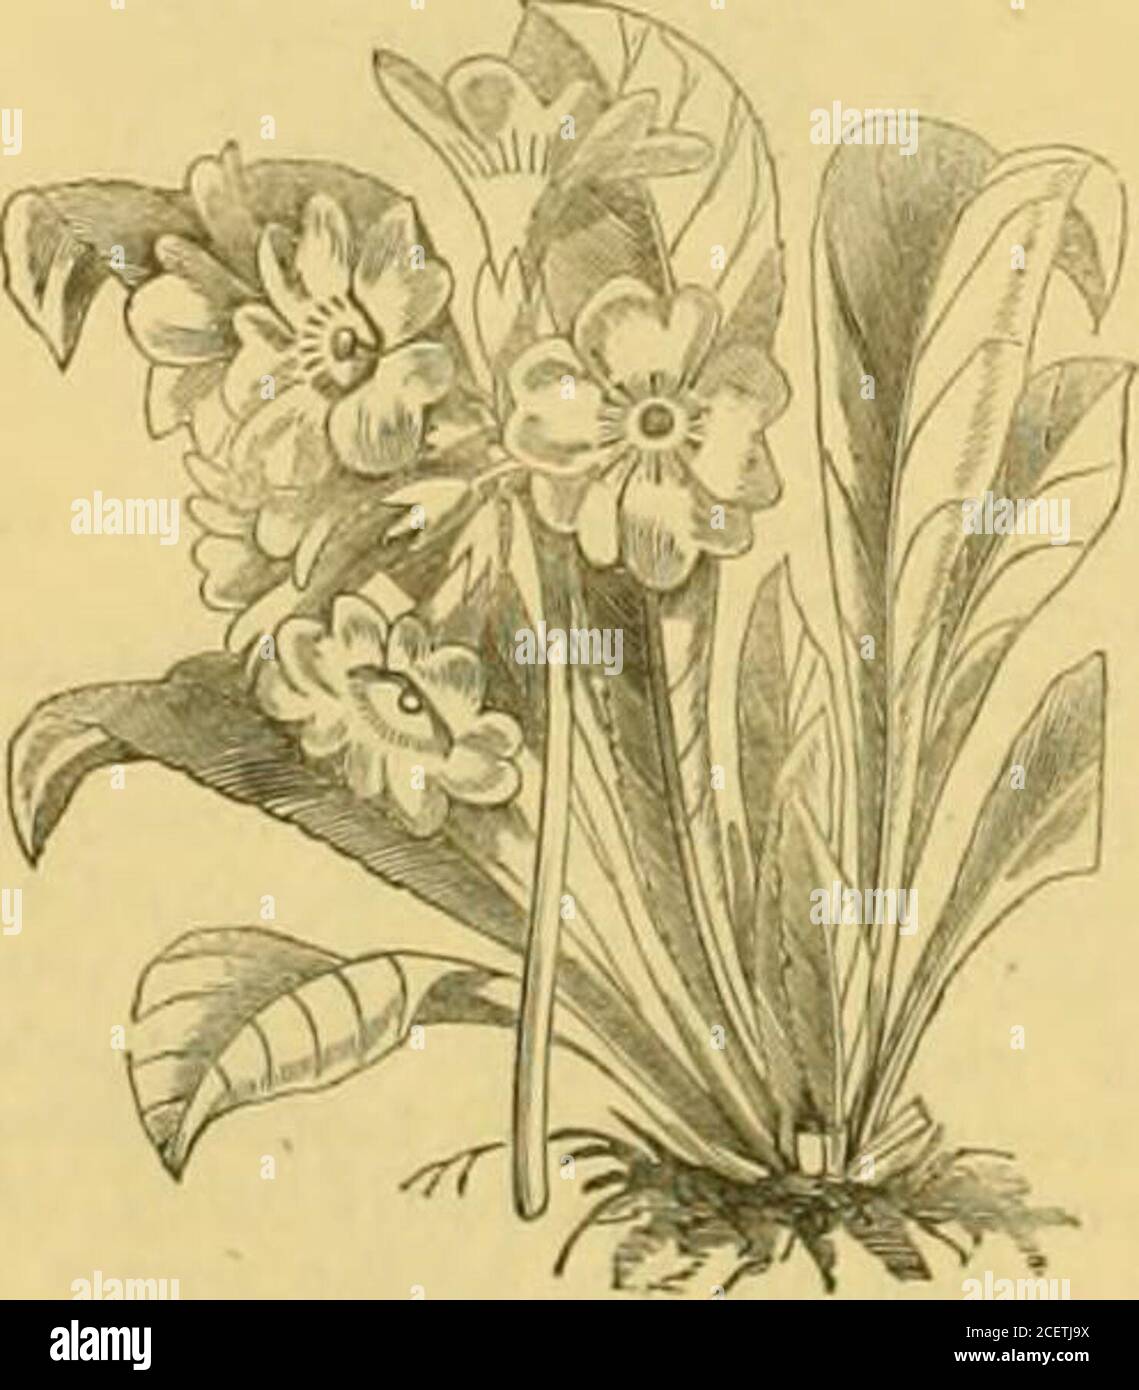 . The Garden : an illustrated weekly journal of gardening in all its branches. ling the width of the corolla; the individualflowers are not sessile but supported on short foot-stalks, and, beingdeveloped in succession, not simultaneously, tho.inflorescence assumesa lax character, as compared with the other species, which we haverecognised as belonging to this section. It is a native of the Cau.casus, and is recorded as flowering in April and May. VI.—The Giant Section.P. sikkimensis.—One, and by no means the least valuable,souvenir of Dr. Ilookers botanical sojourn amongst the high mountainpas Stock Photo